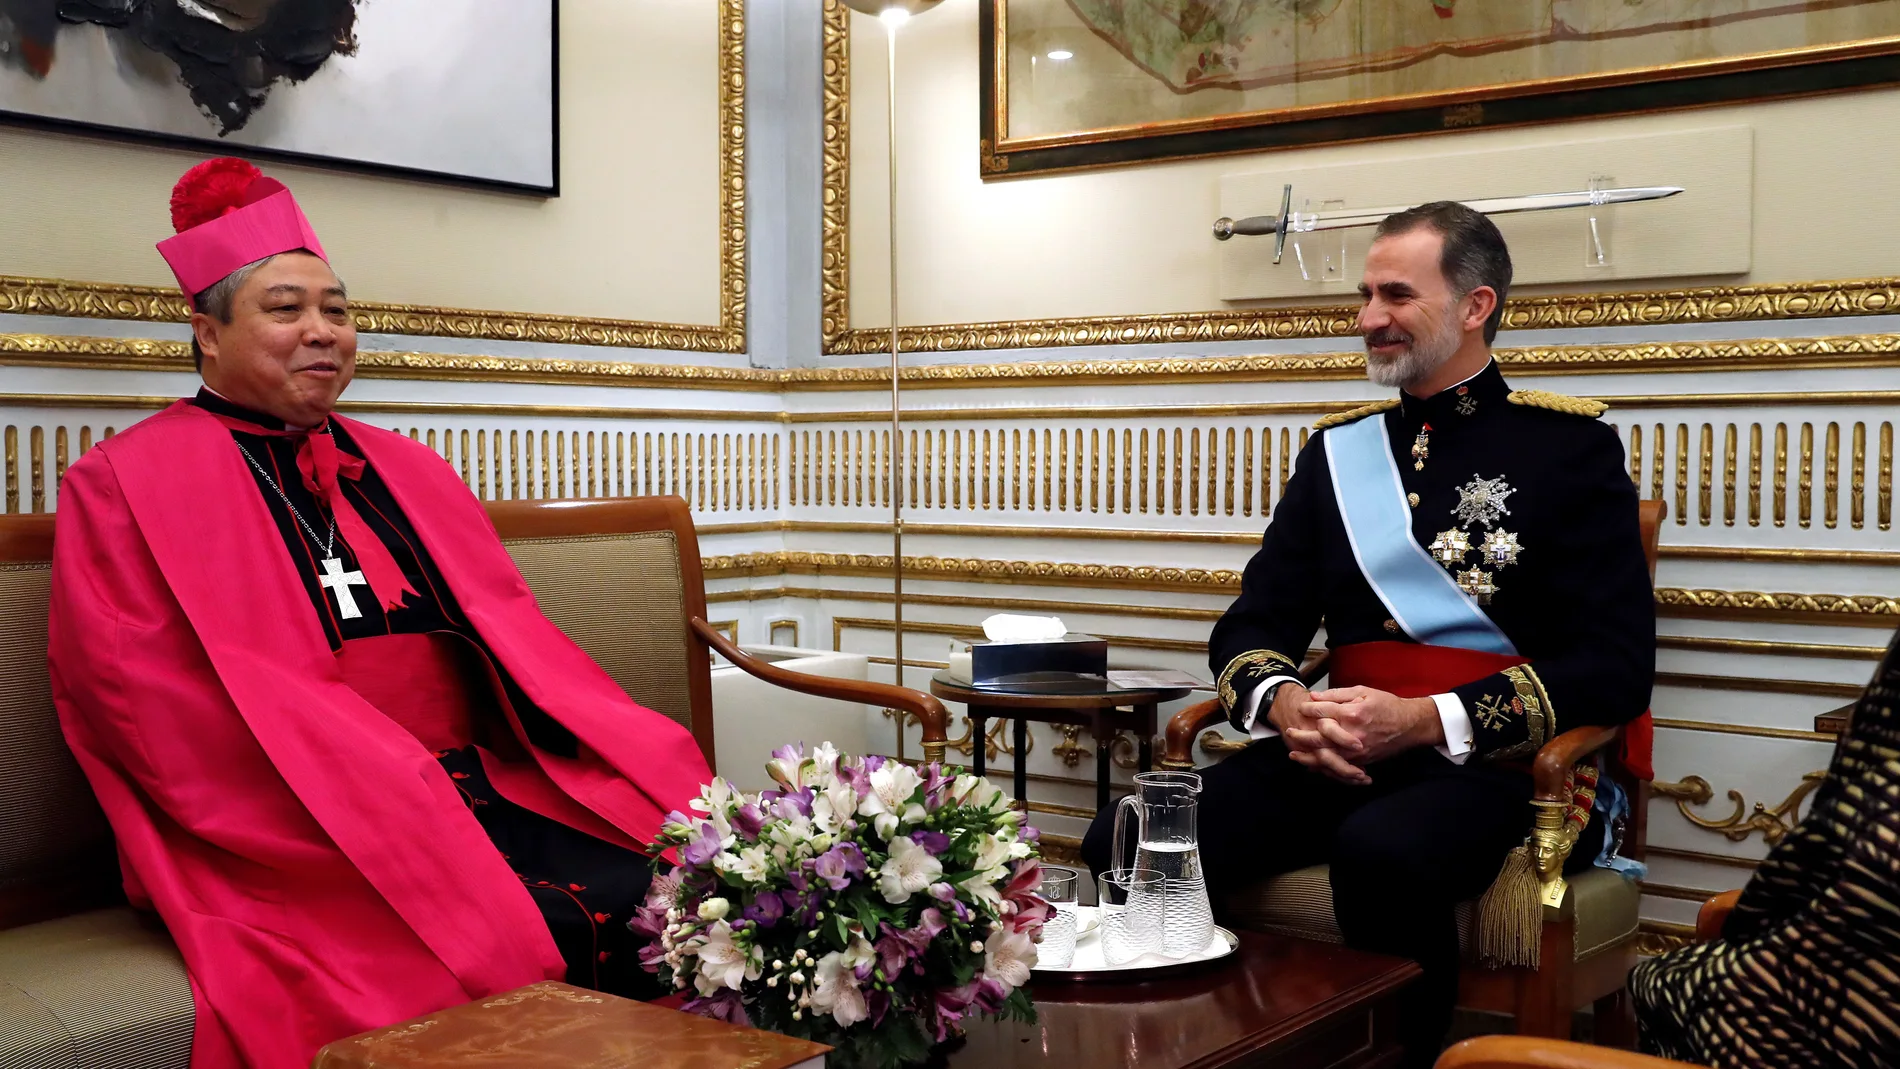 Spain's King Felipe VI receives credentials from new Holy See ambassador, in Madrid